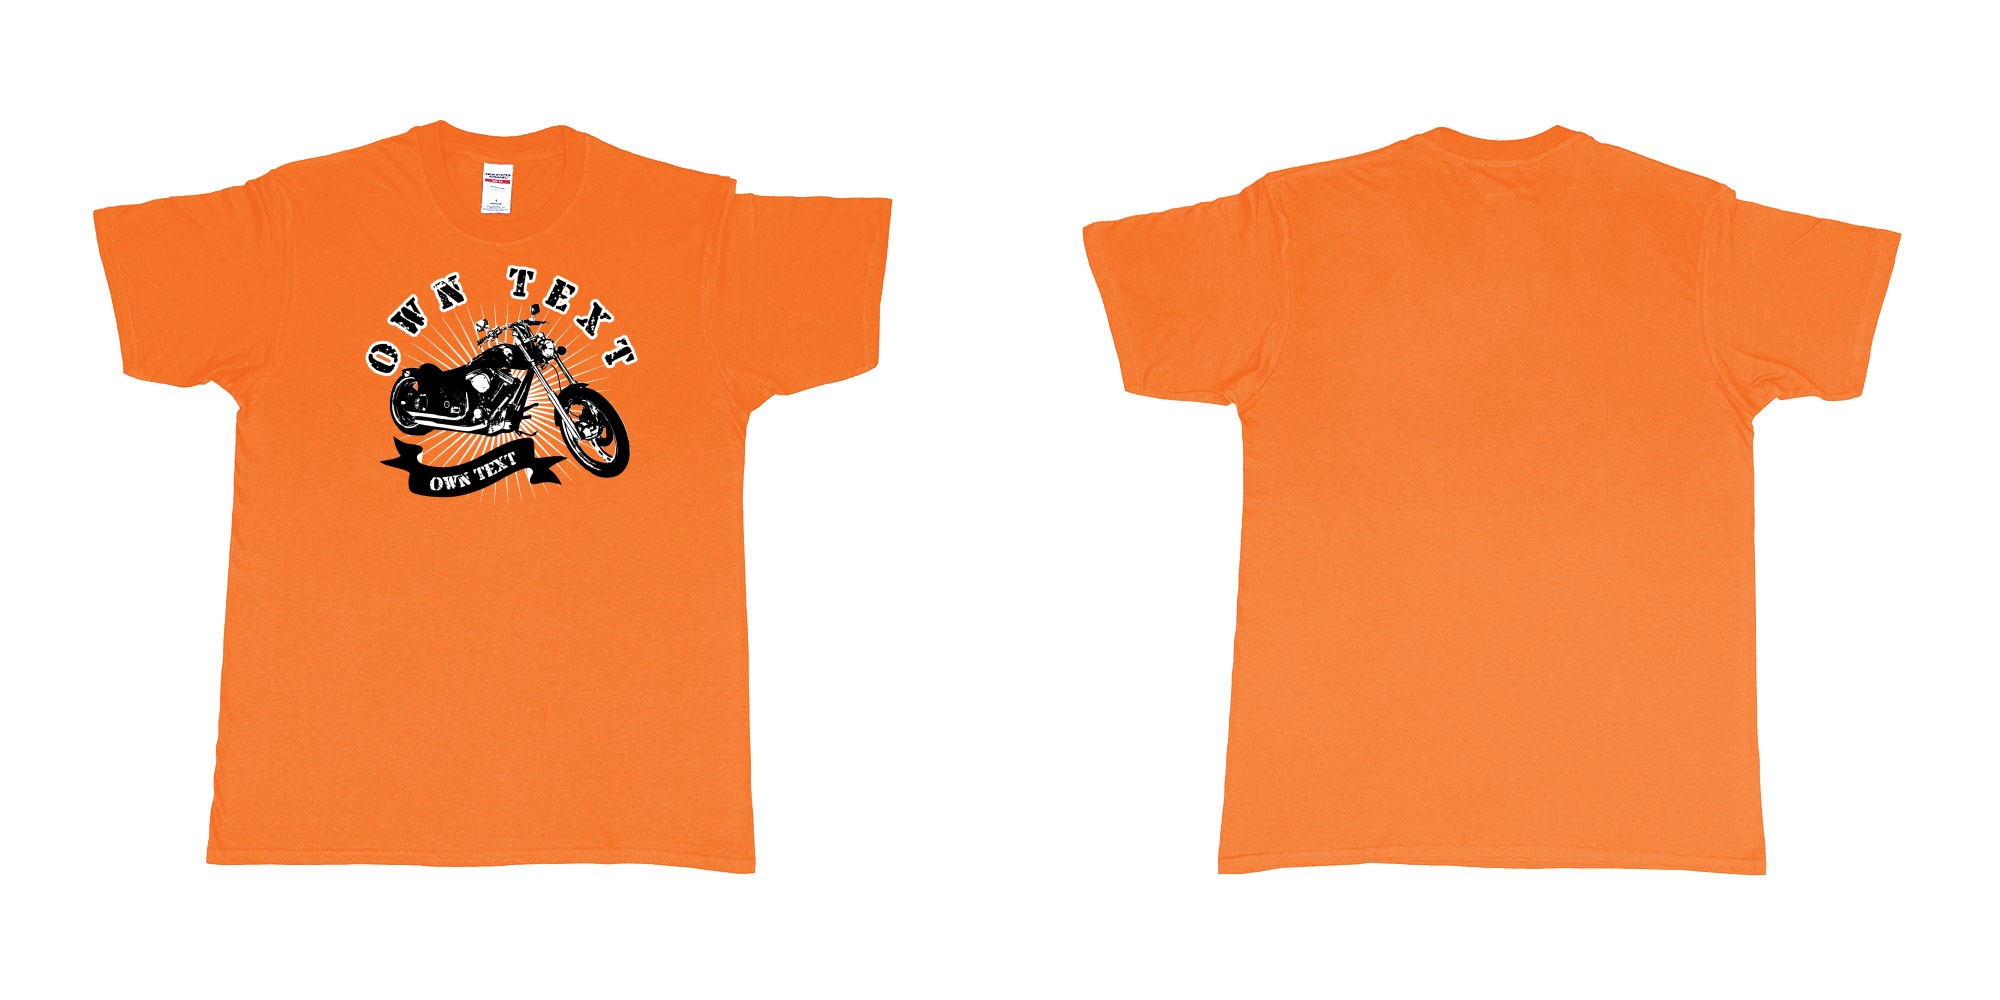 Custom tshirt design chopper motorcycle with your personalized own text printing in bali in fabric color orange choice your own text made in Bali by The Pirate Way